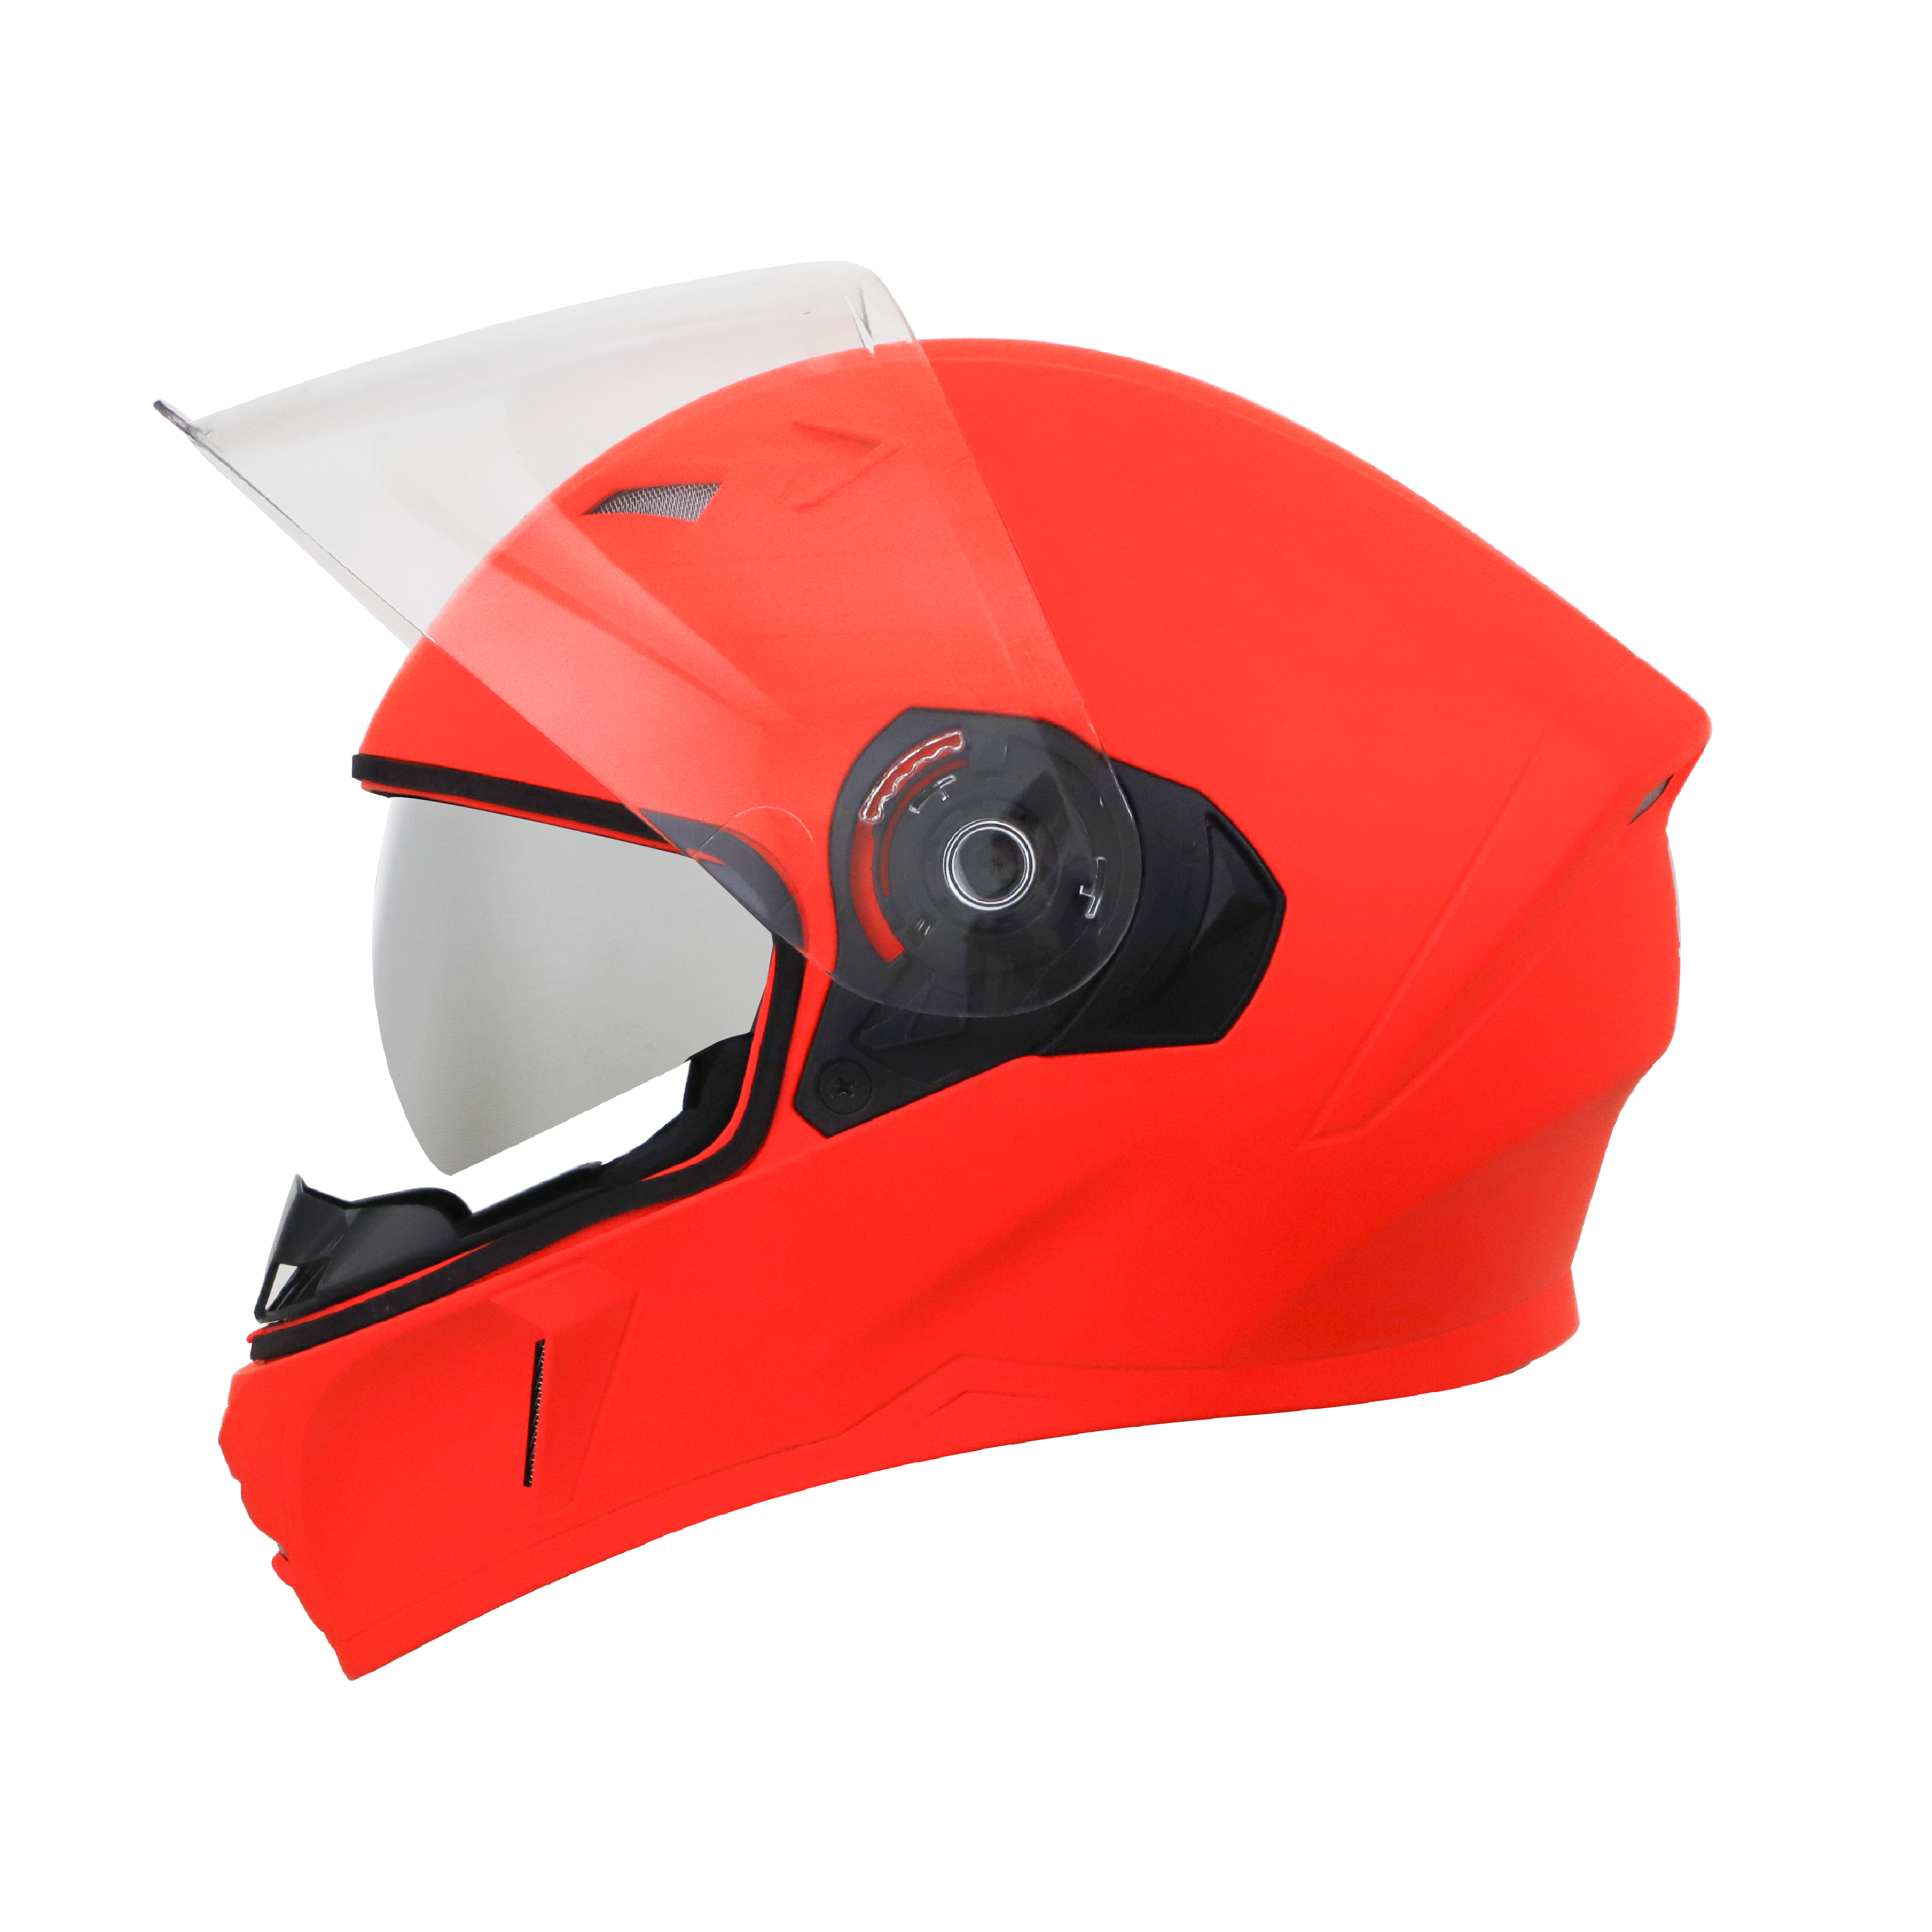 SBA-21 VFX GLOSSY FLUO RED WITH CHROME SILVER INNER SUN SHIELD